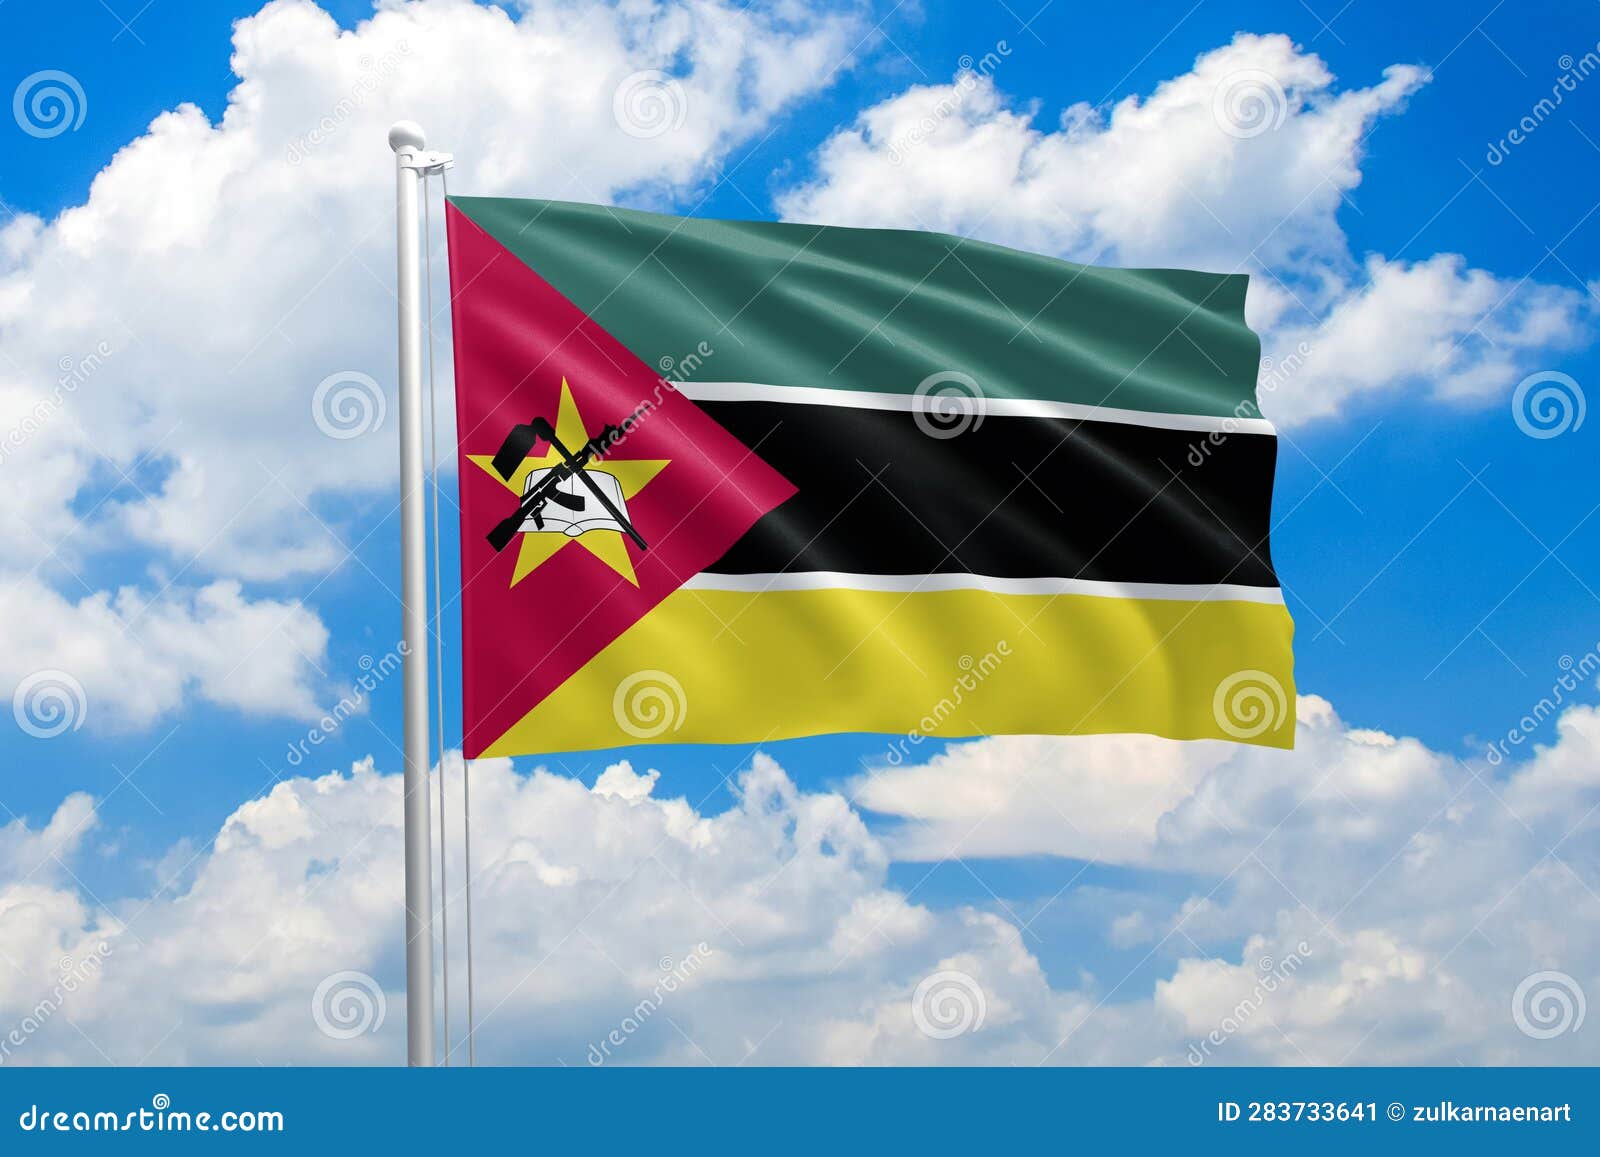 mozambique national flag waving in the wind on clouds sky. high quality fabric. international relations concept